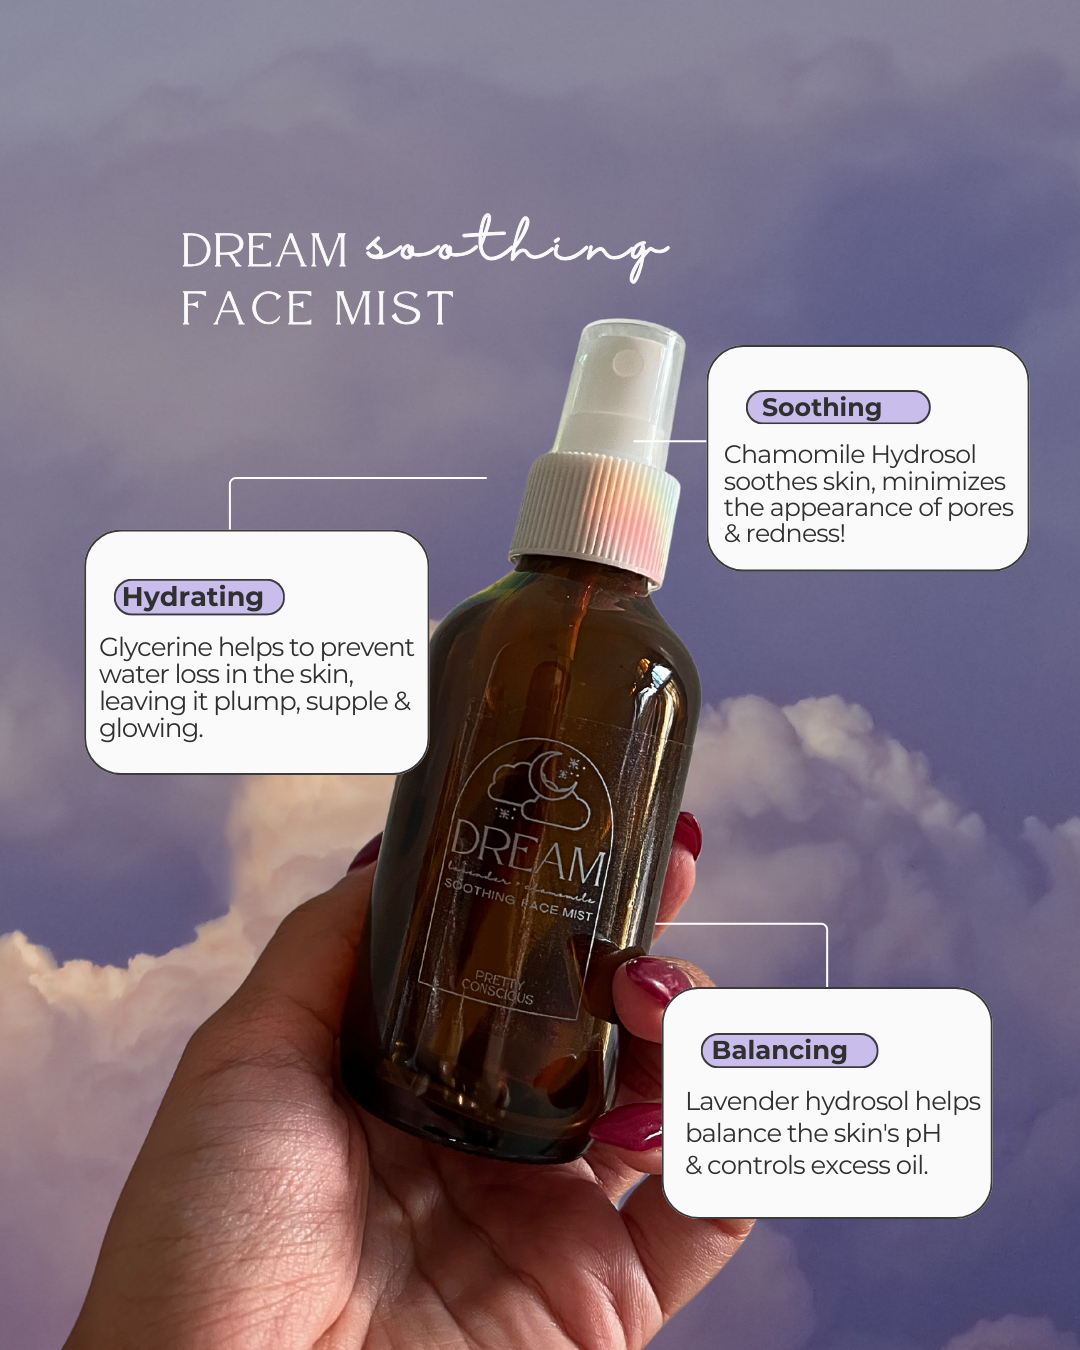 DREAM Soothing Face Mist